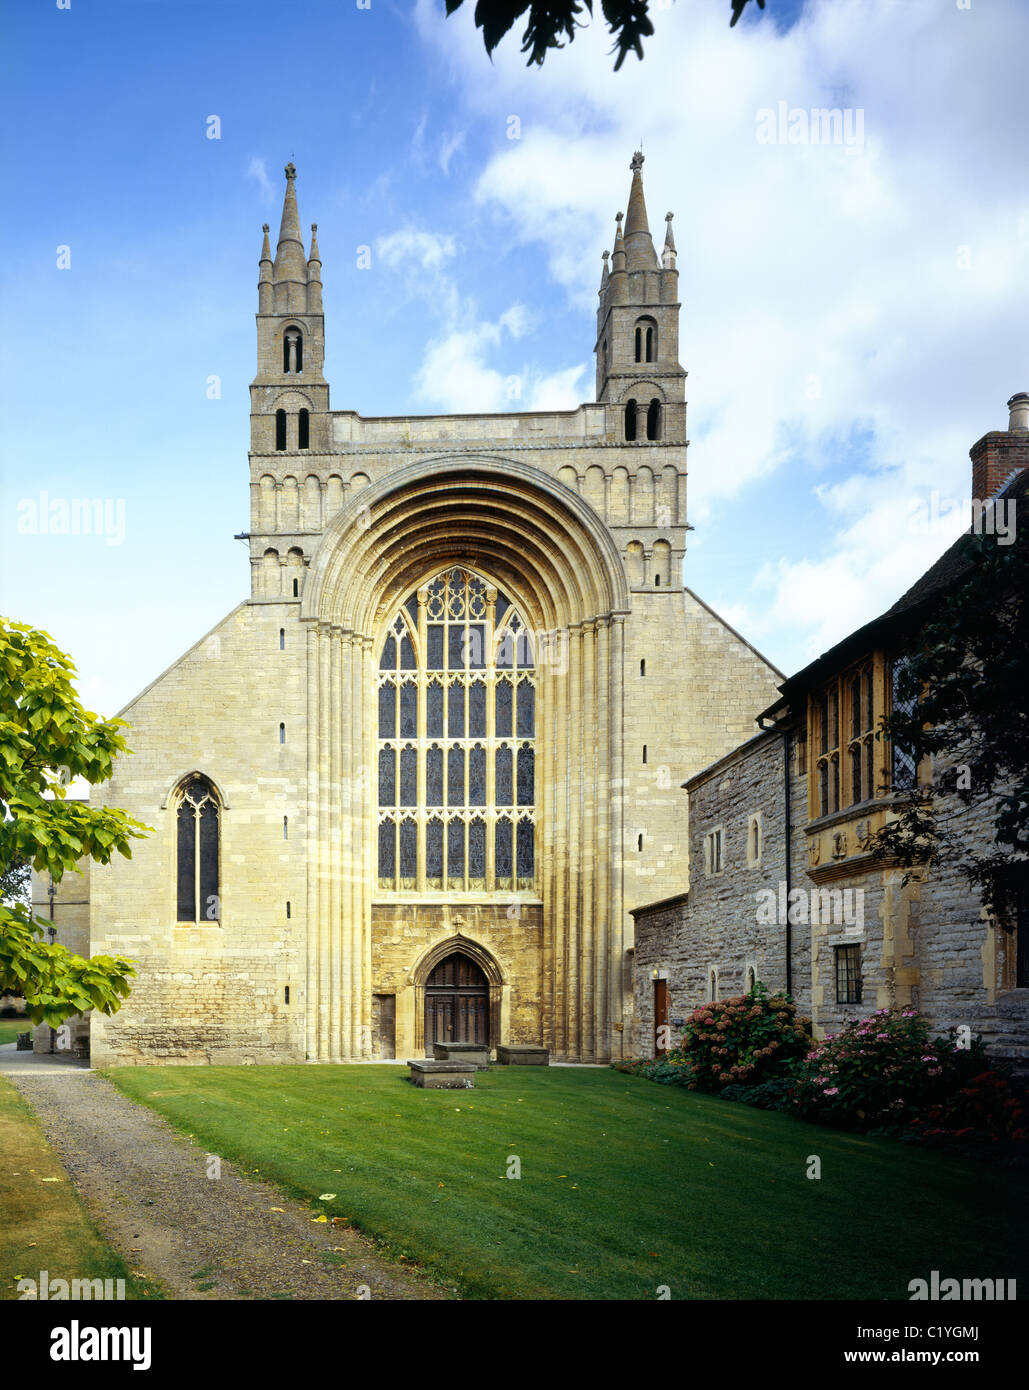 The Norman west front of Tewkesbury Abbey, Gloucestershire, England. Stock Photo